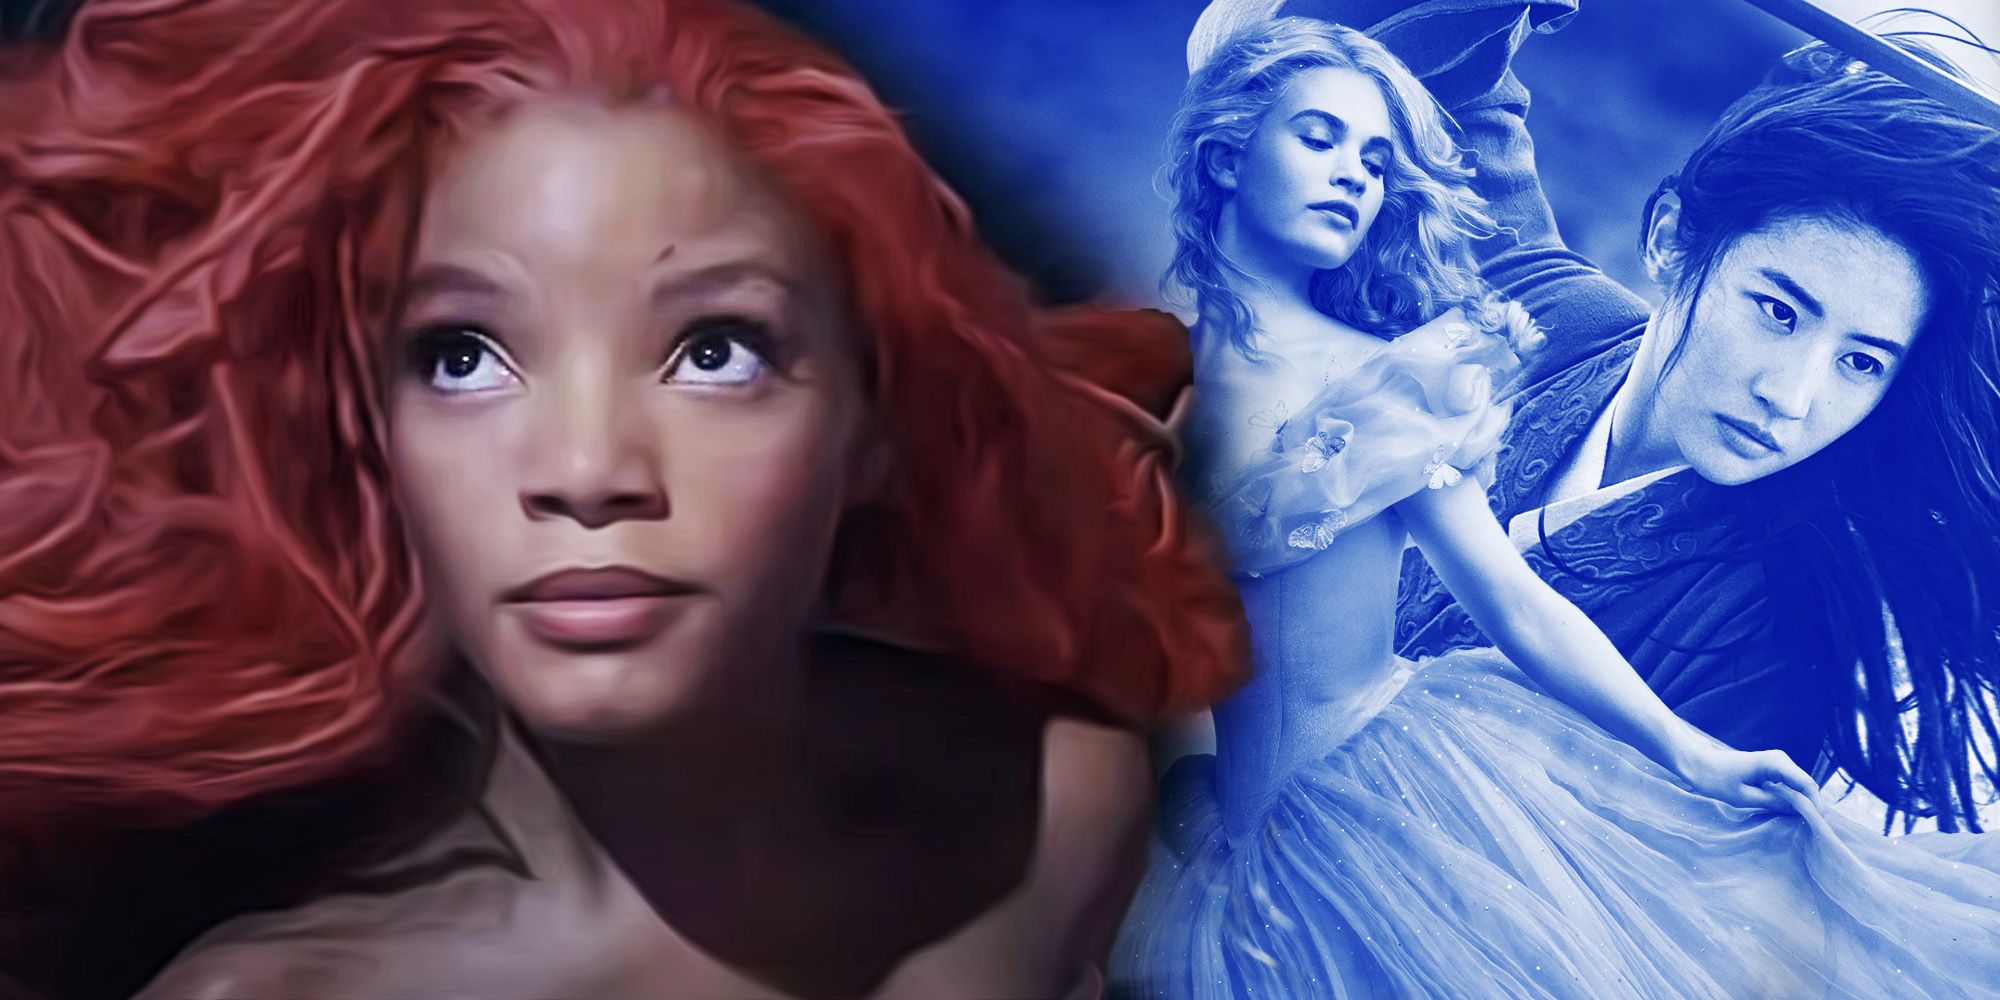 Halle Bailey as Ariel in the Little Mermaid with Disney's live-action Cinderella and Mulan